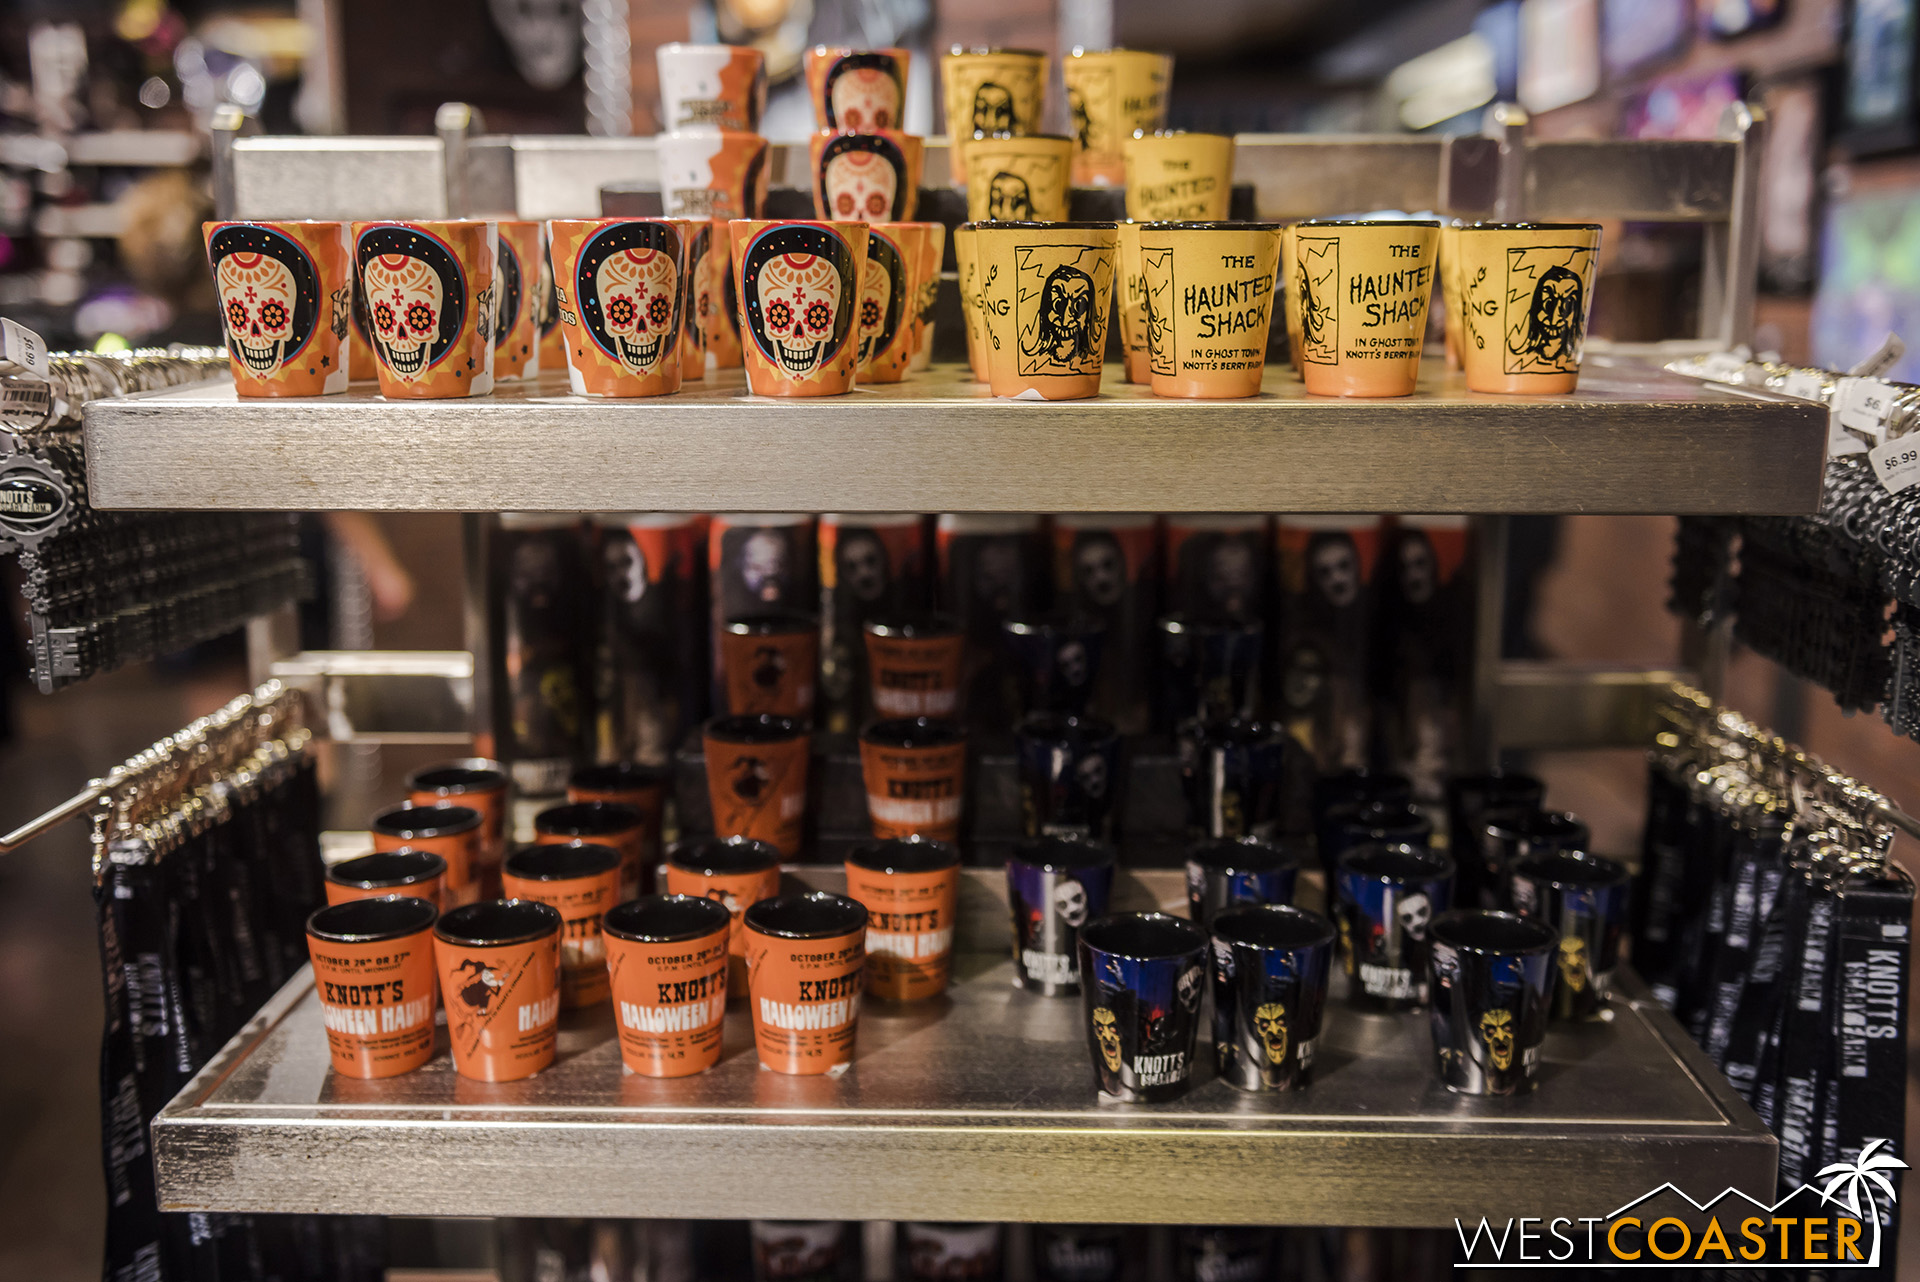  Buy a shot glass at Knott’s, then double dip and use it at one of Dark Harbor’s 287 bars! 